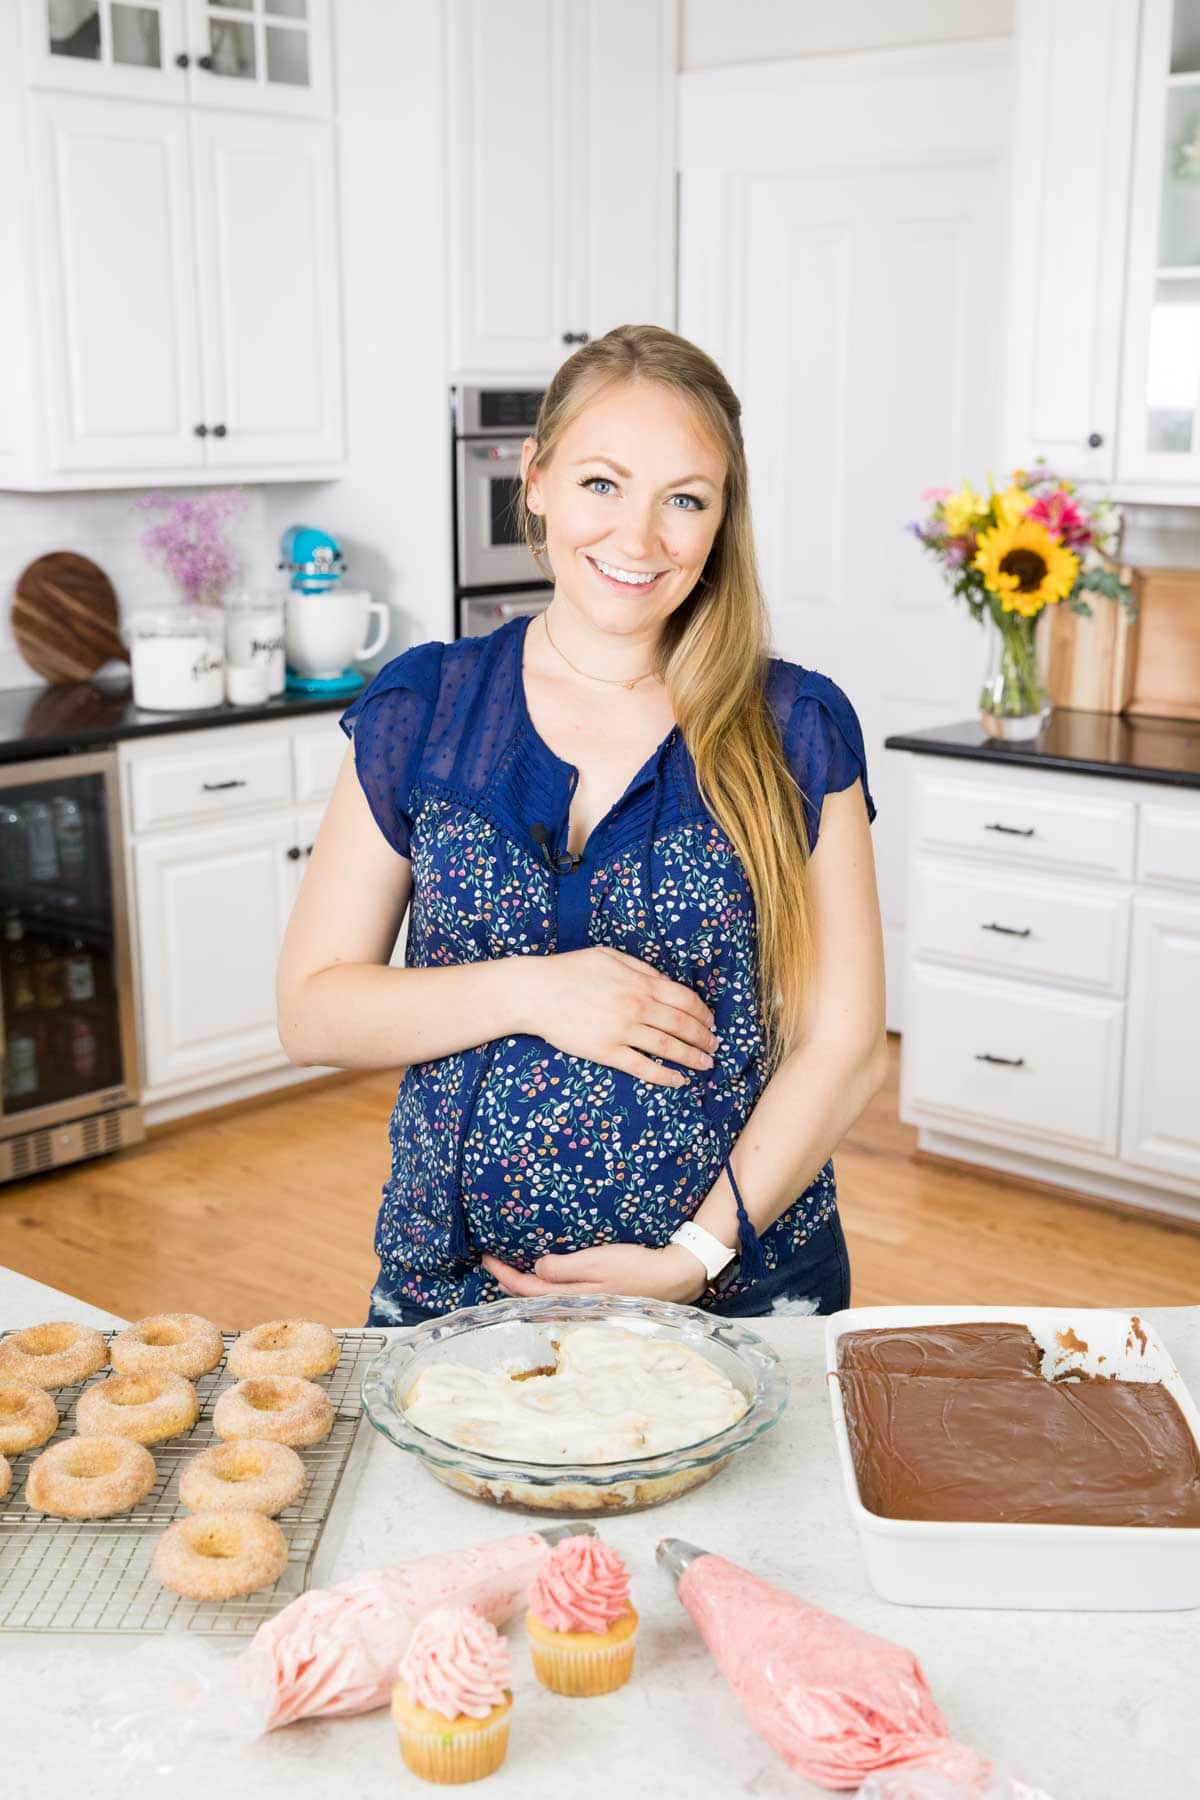 The author in a blue shirt holding her pregnant belly in the kitchen. On the counter in front of her is an array of desserts